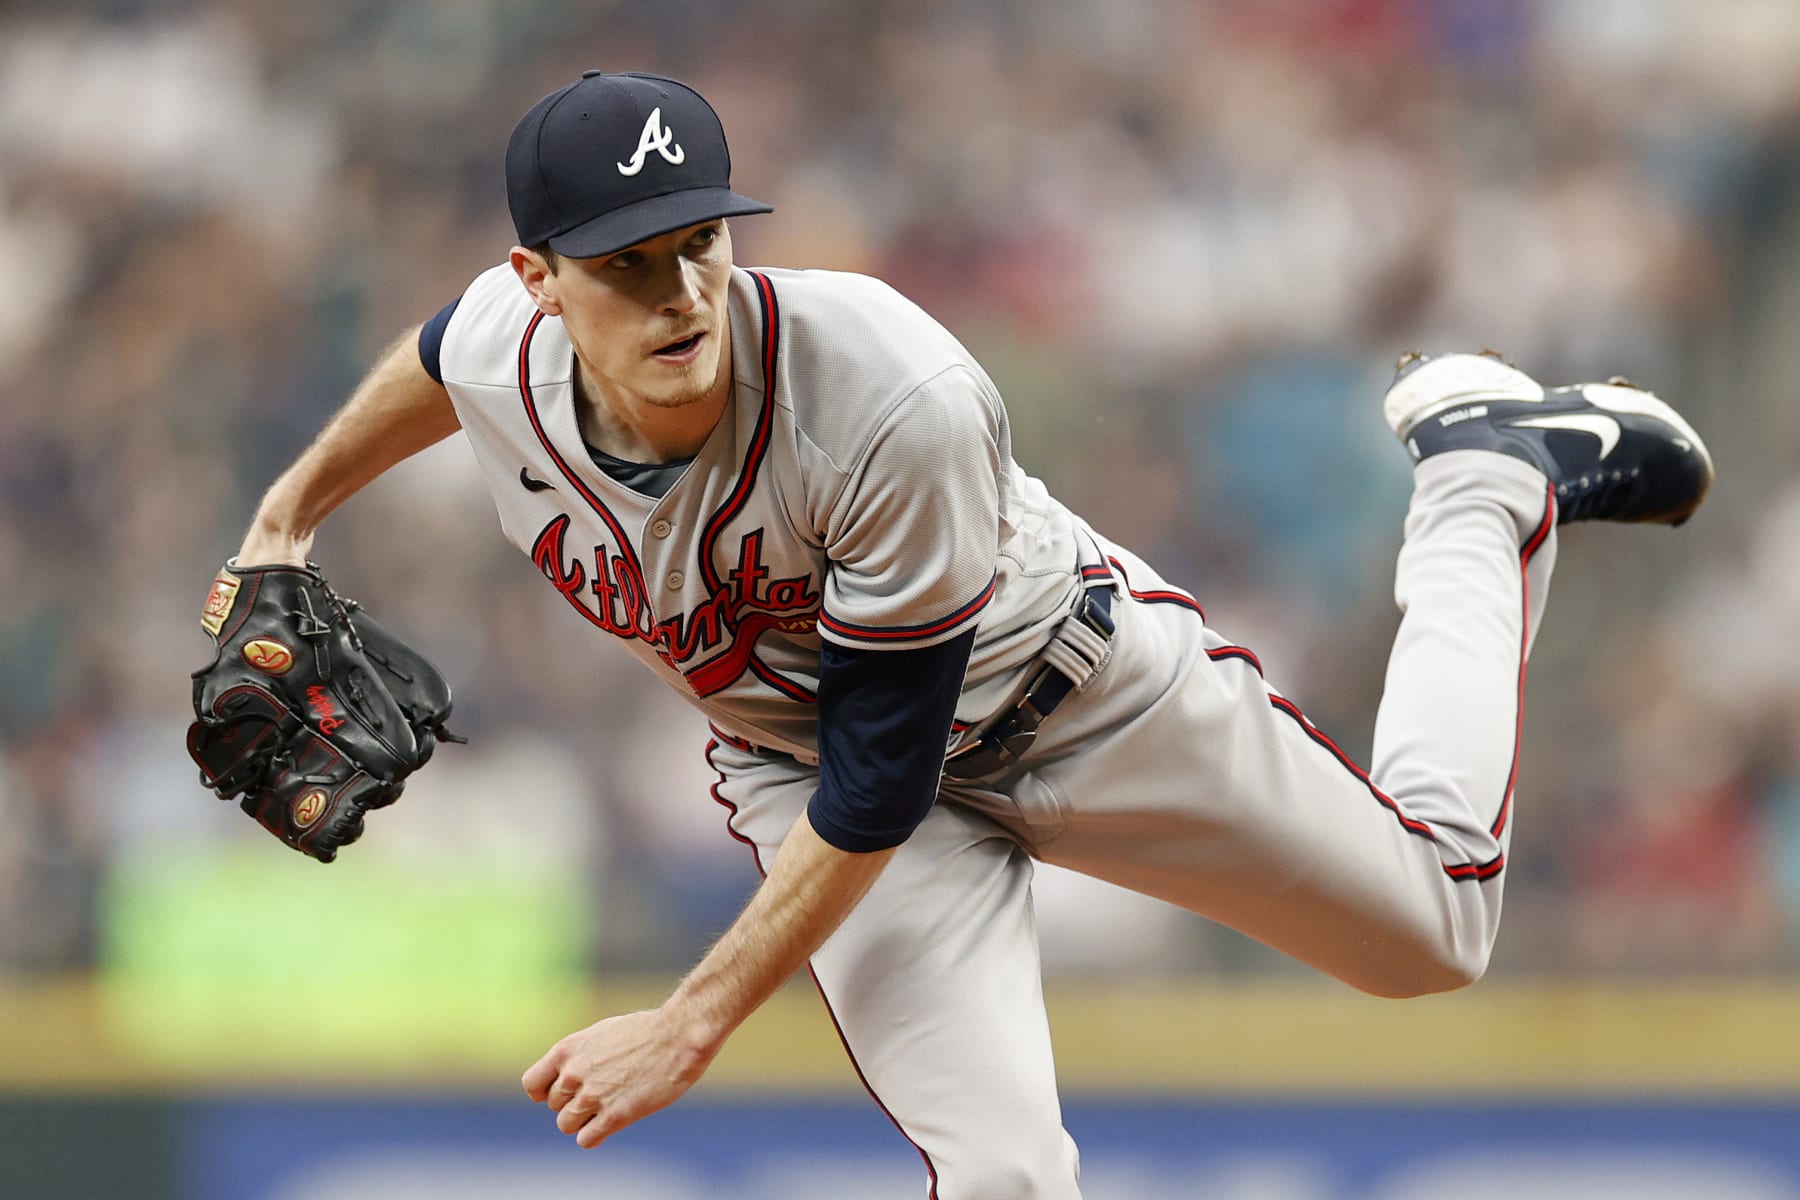 Braves will face persistent Nationals pitcher Patrick Corbin on opening day